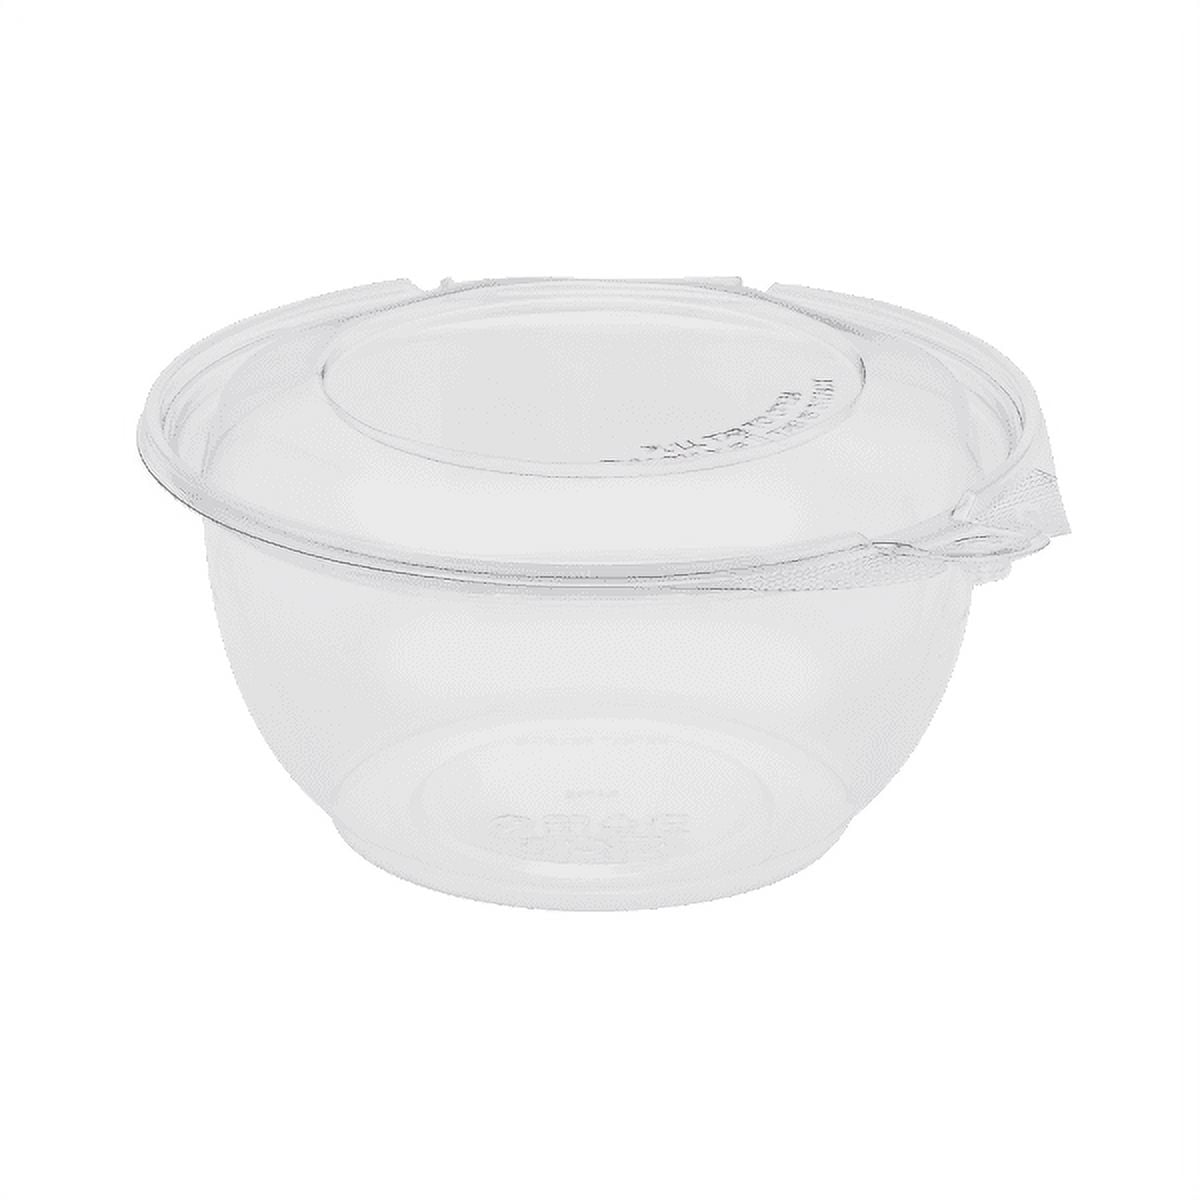 VeZee 64 Oz Disposable BPA Free Rose Bowl / Salad Containers with Lids in  Clear Plastic Disposable for a Fresh Airtight Seal, Portable Serving Bowl  Set for Meal Prep & Preserve Freshness:(Qty=500) 